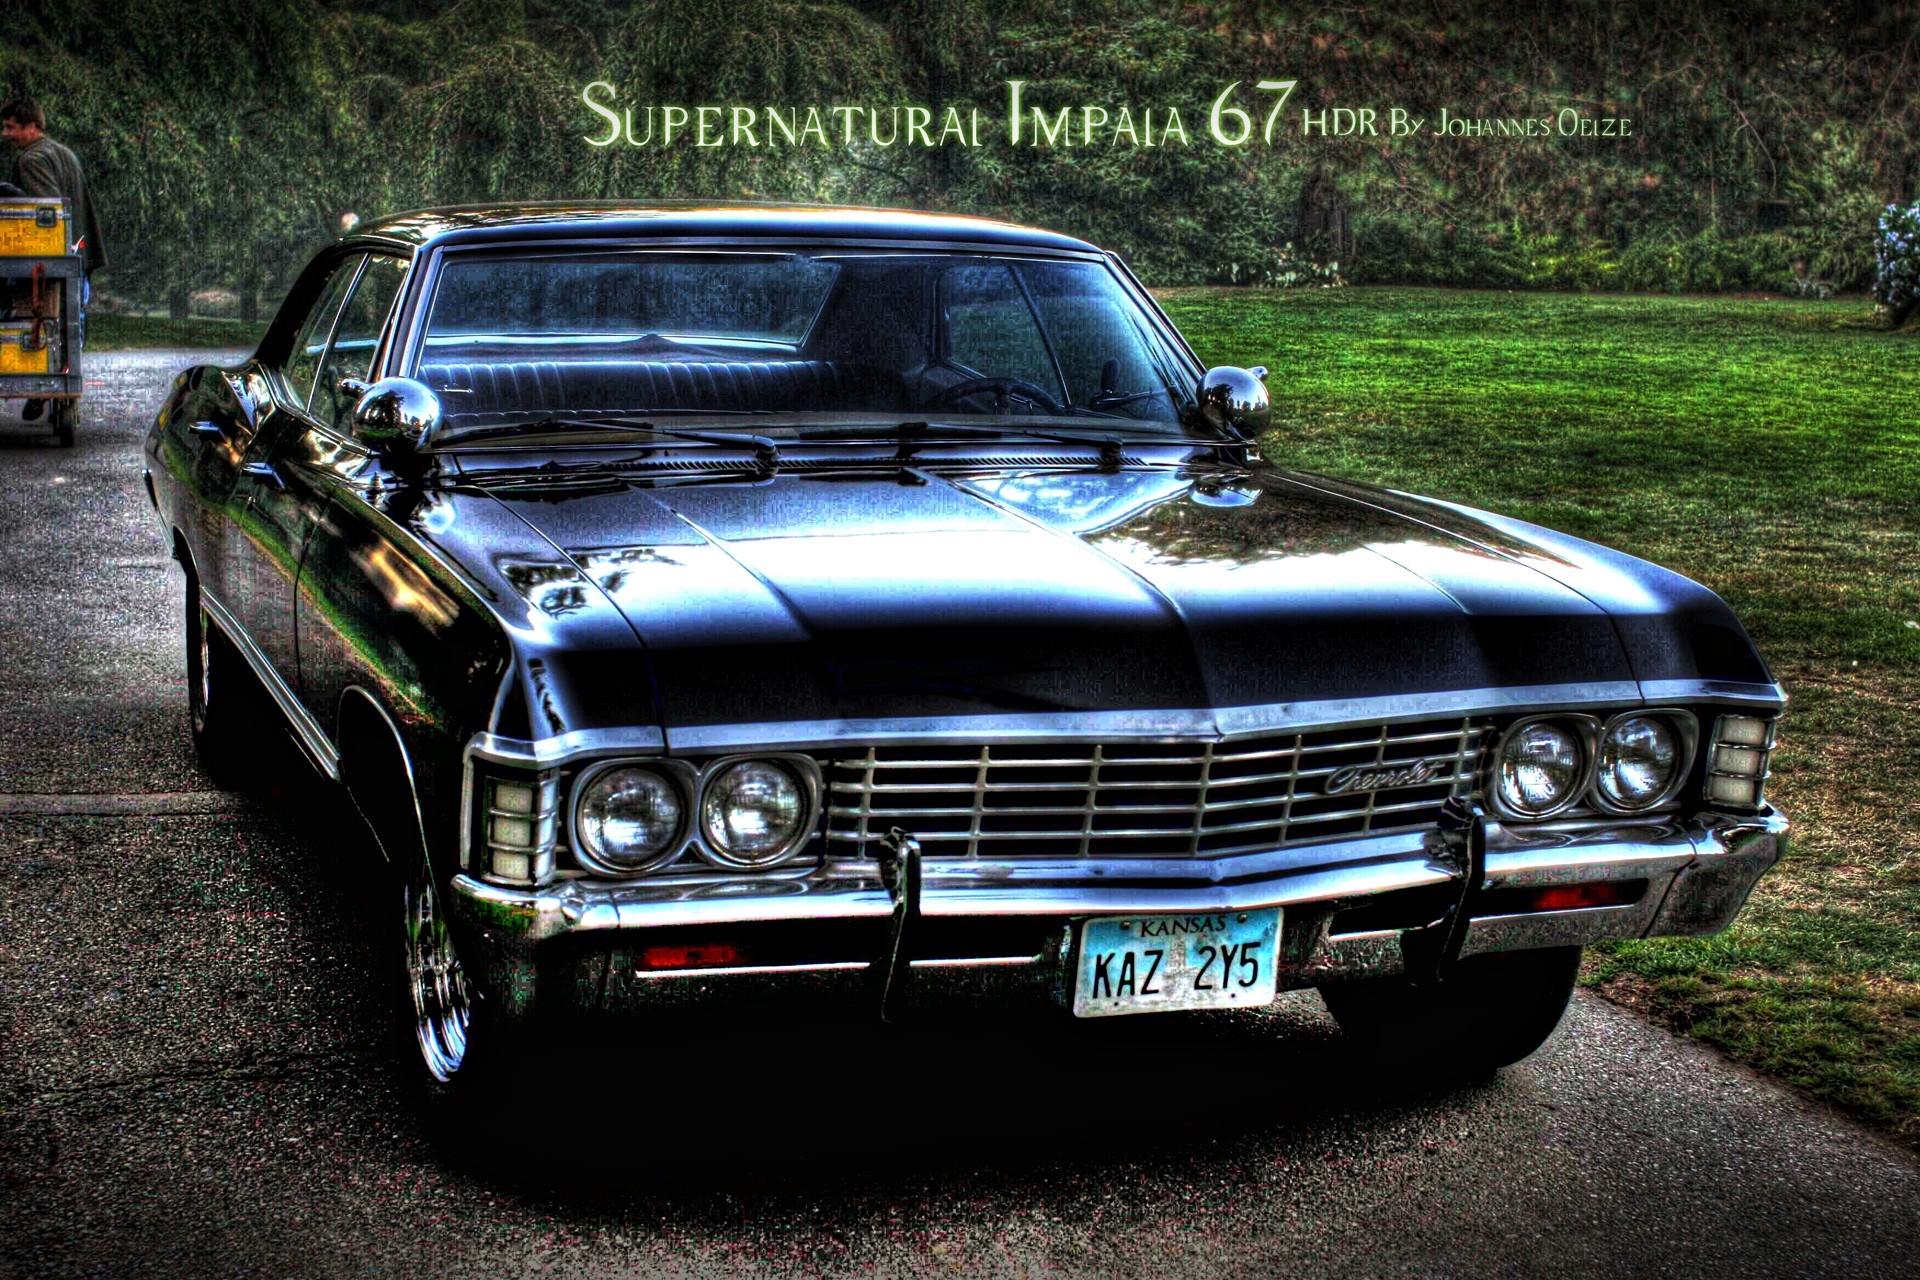 1967 Chevy Impala If Im going old school, this would be my car. Just like the one in Supernatural